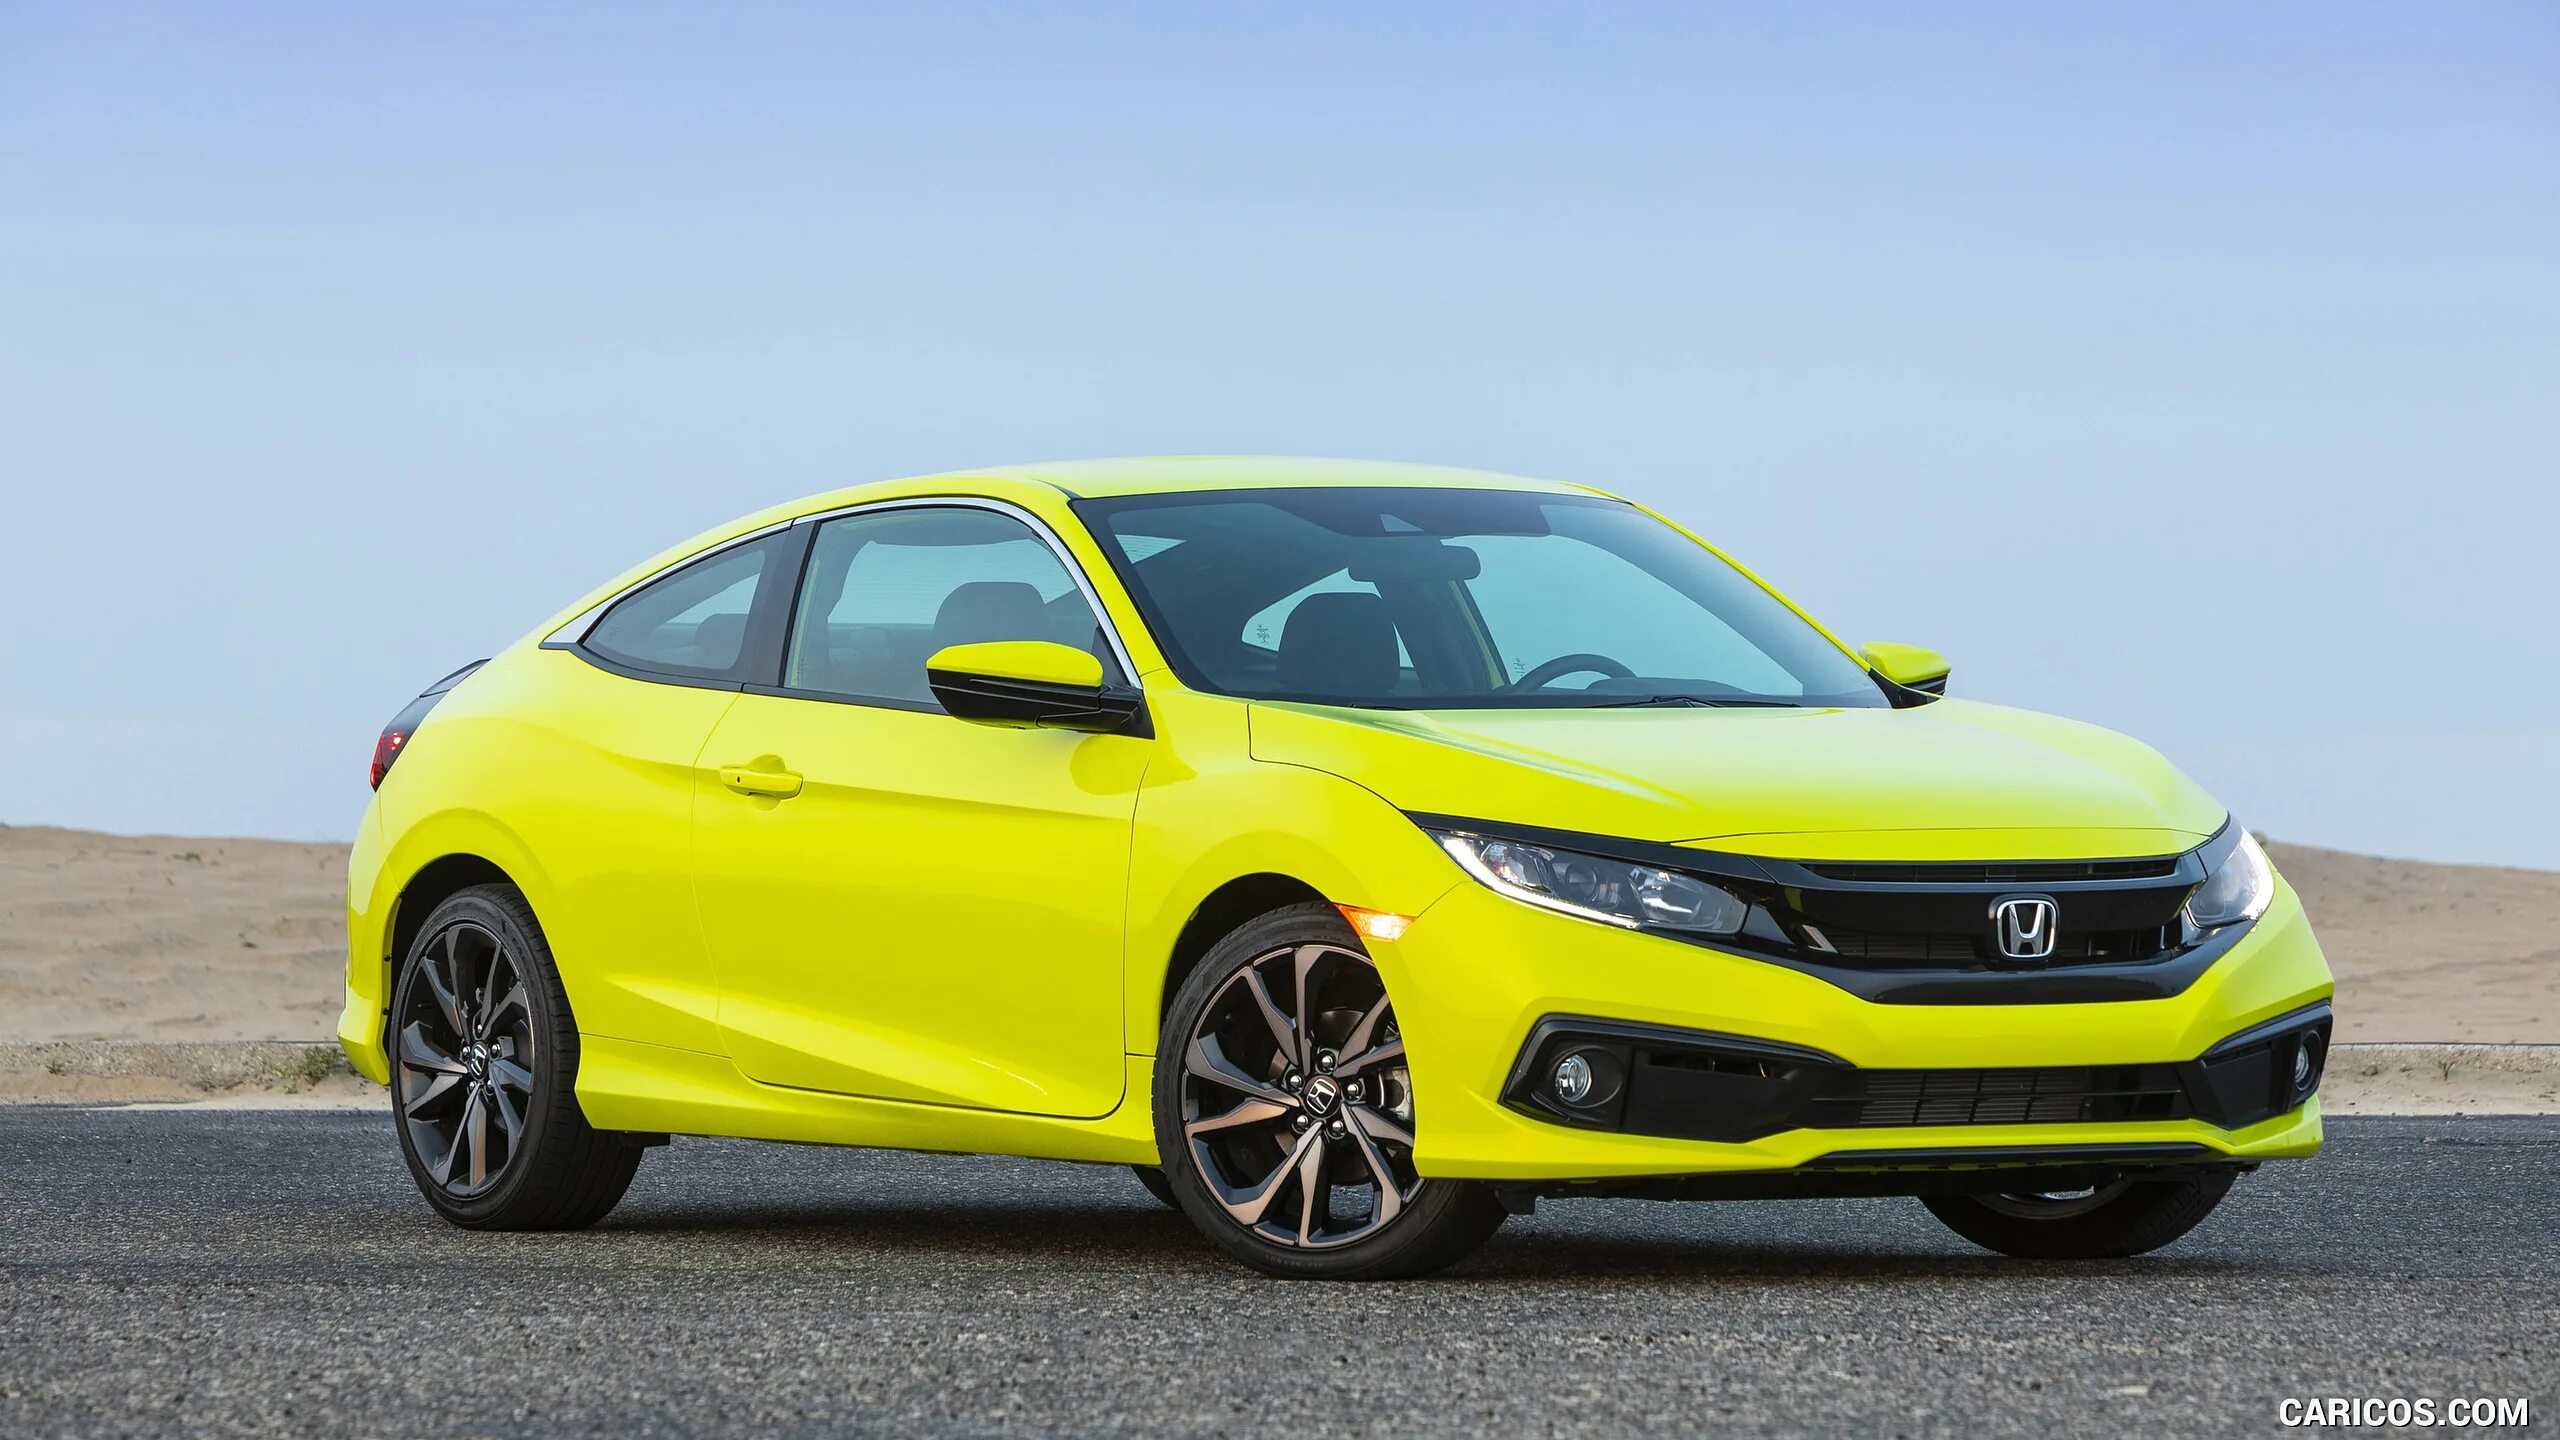 Honda civic купе. Honda Civic купе 2021. Honda Civic Coupe 2020. Honda Civic 2020 купе. Honda Civic 2021 Coupe.